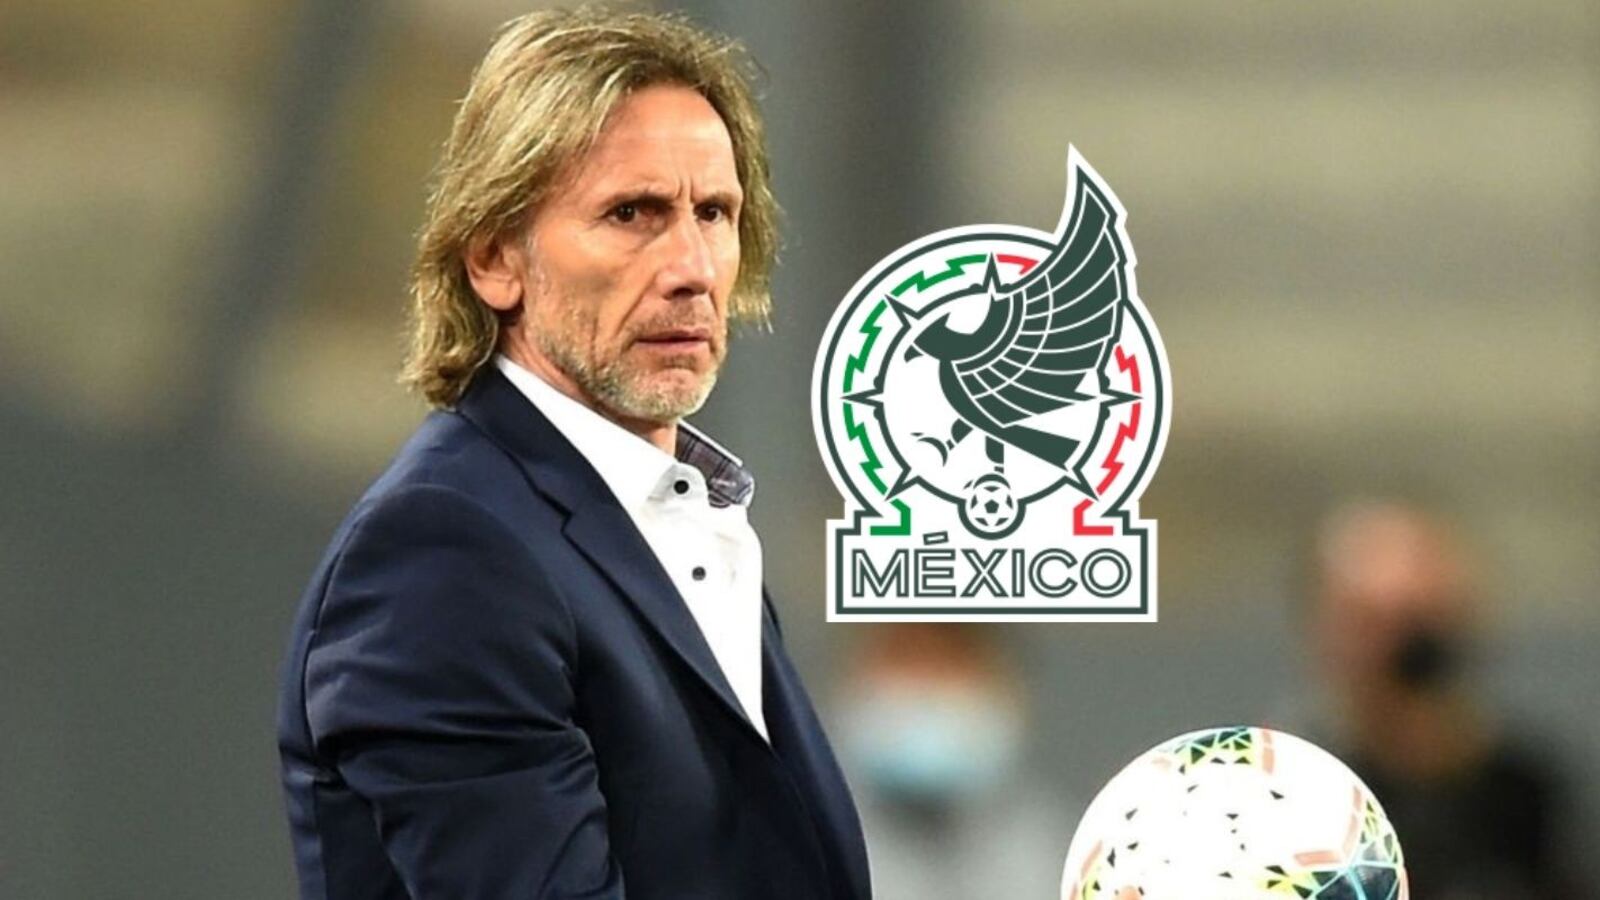 The wait is over, what Gareca is asking for to lead El Tri and make it a powerhouse again